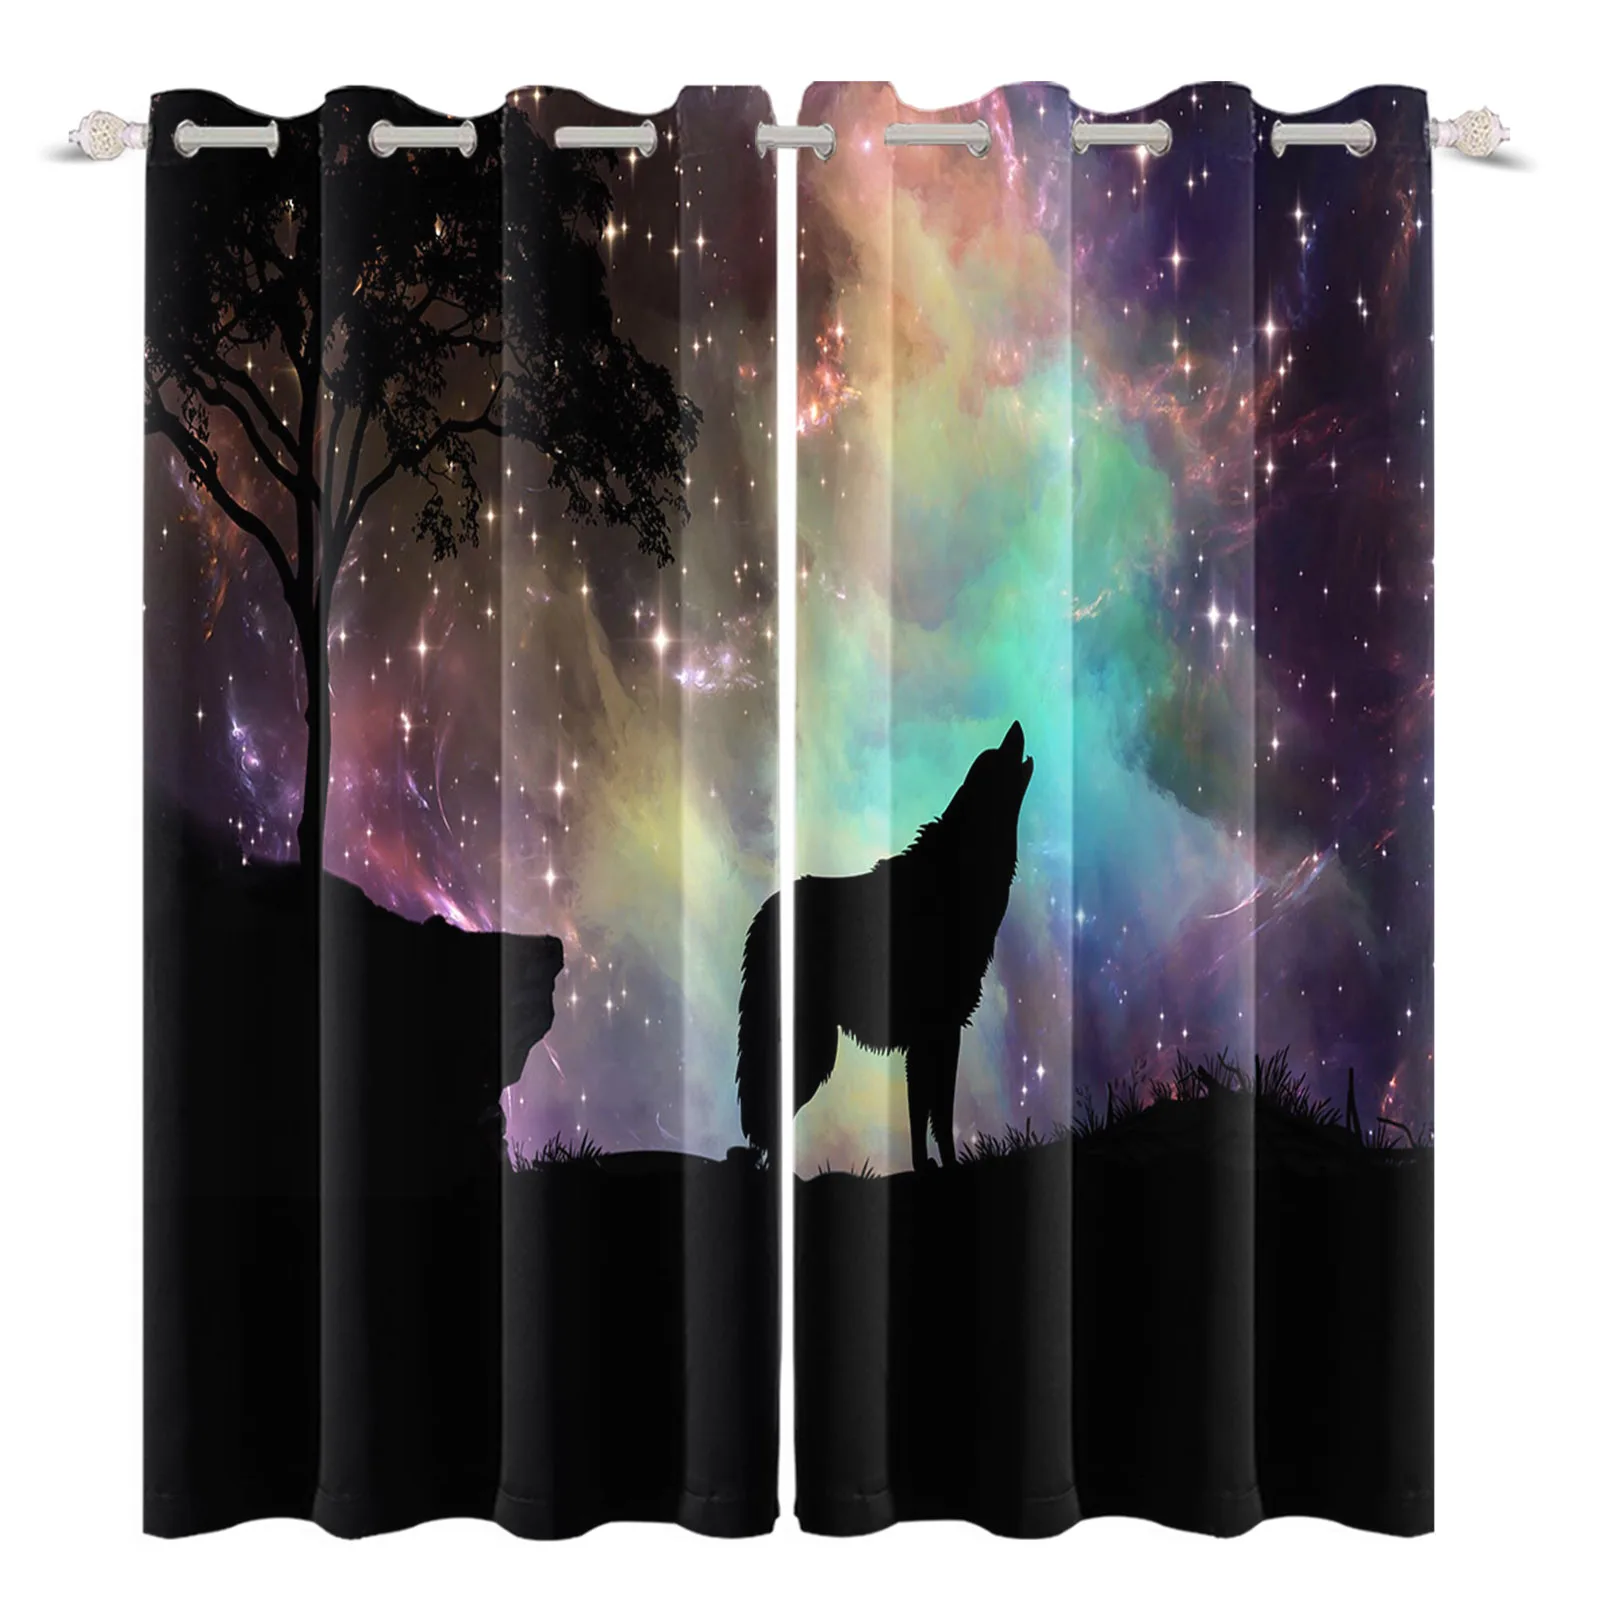 

3D Printing Howling Wolf Under The Night Sky Pattern Curtains Home Decor For Brave Boy Bedroom Perforated Blackout Drapes